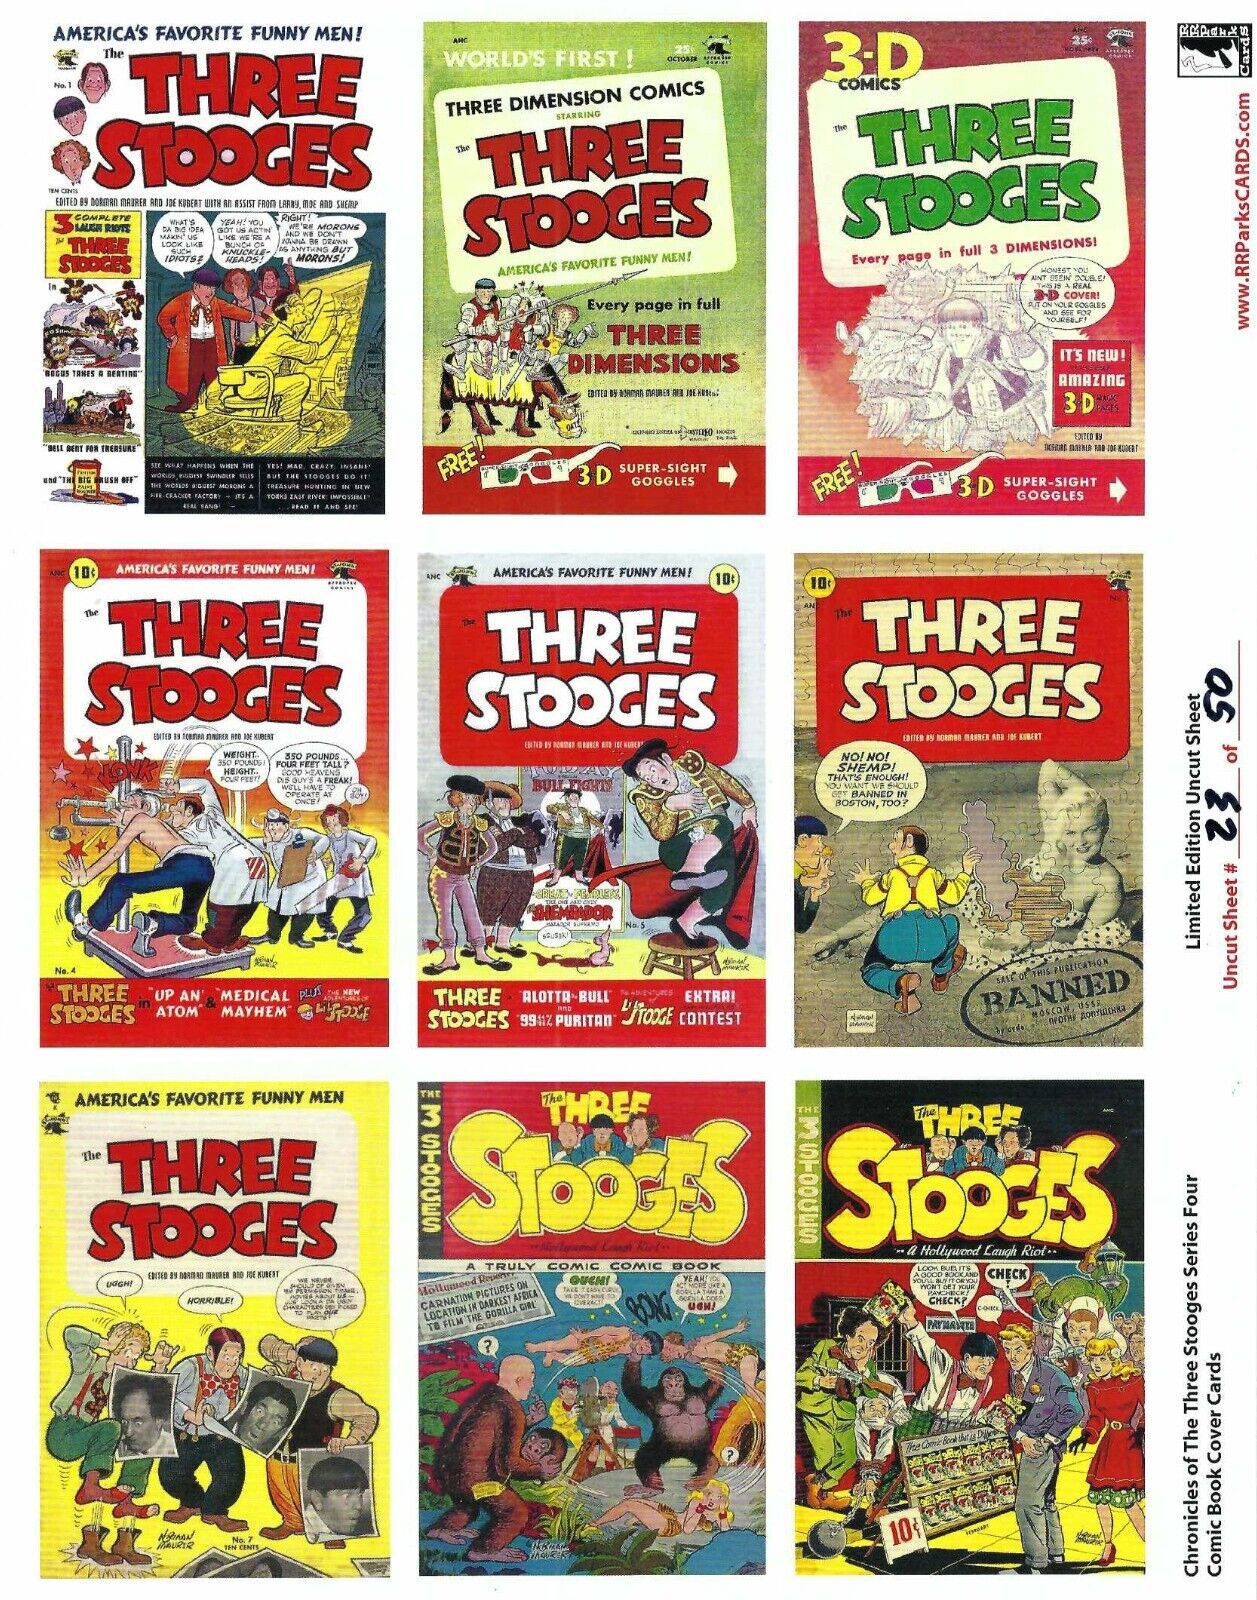 THE THREE STOOGES UNCUT CARD PANEL COMIC BOOK COVERS 23/50 LTD 8 1/2